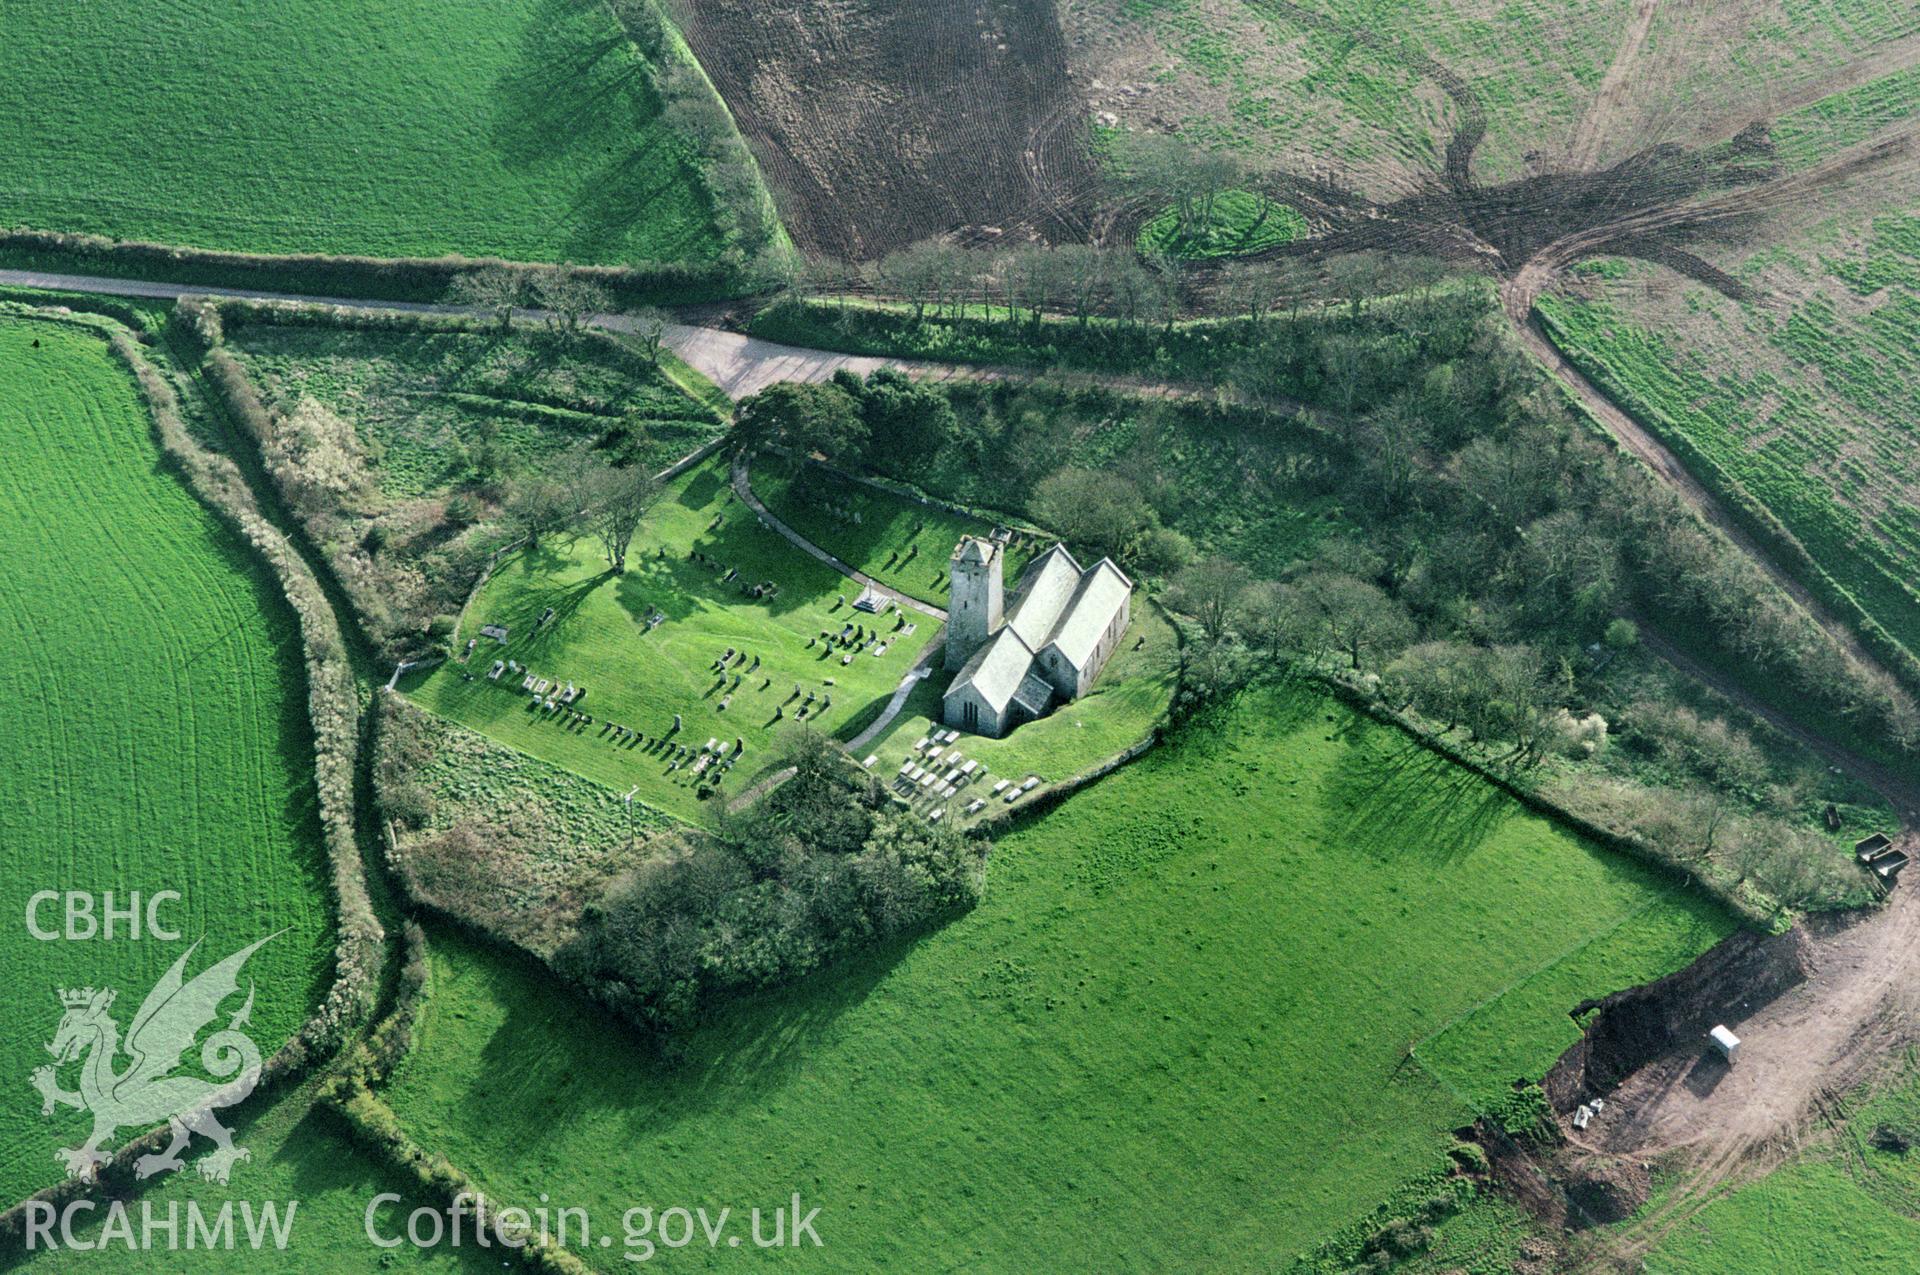 Slide of RCAHMW colour oblique aerial photograph of St Michaels Church, Castlemartin, taken by C.R. Musson, 1993.